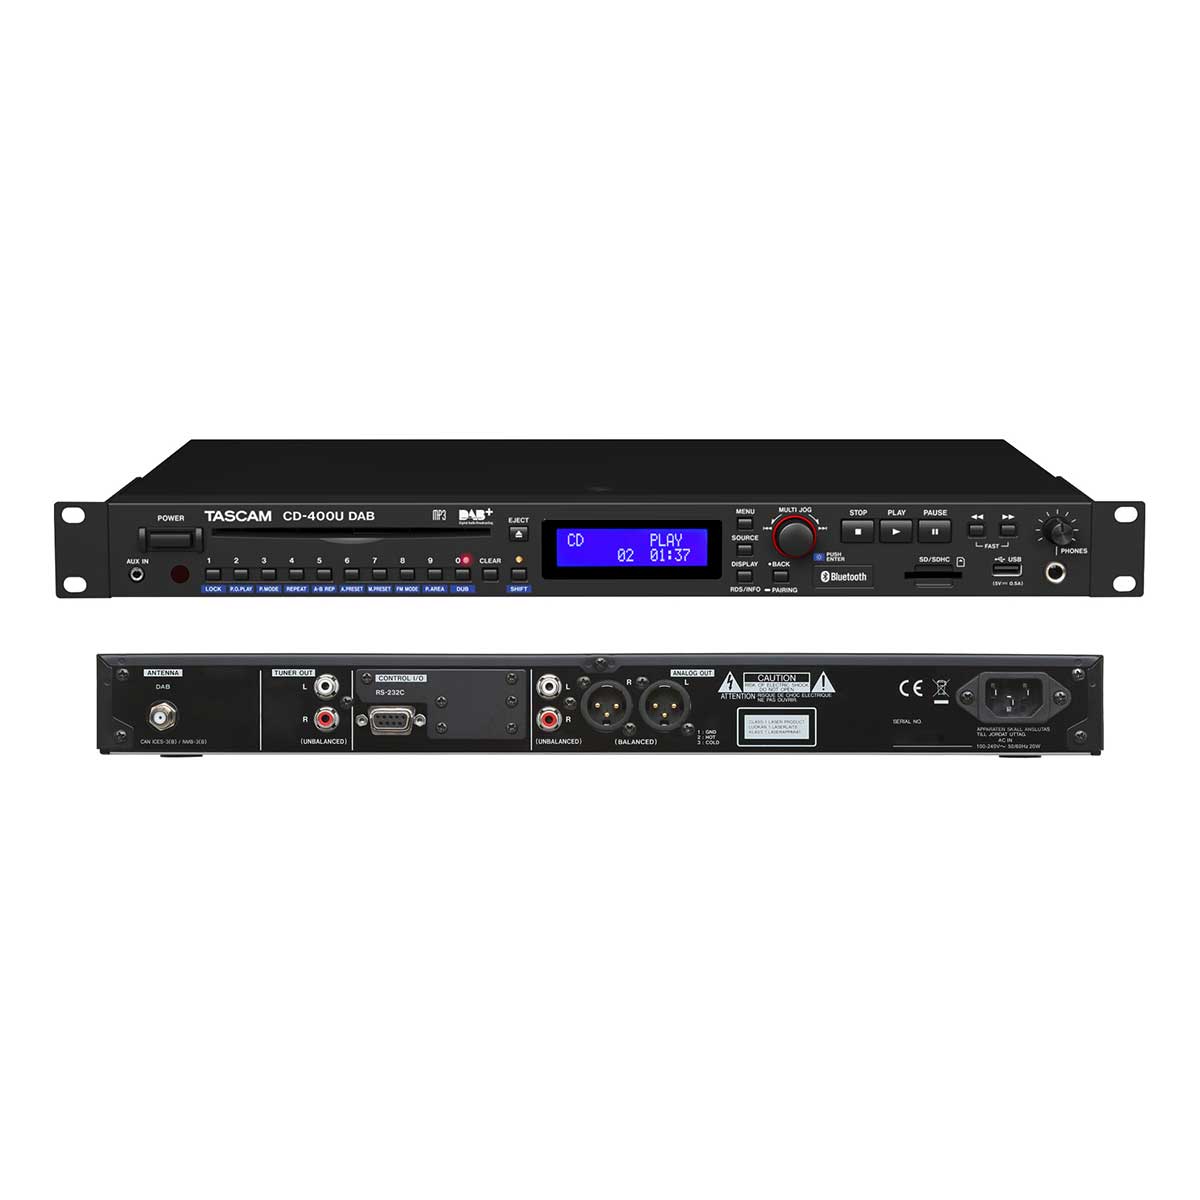 TASCAM CD-400U DAB CD/SD/USB Player with Bluetooth receiver and DAB(+)/FM tuner